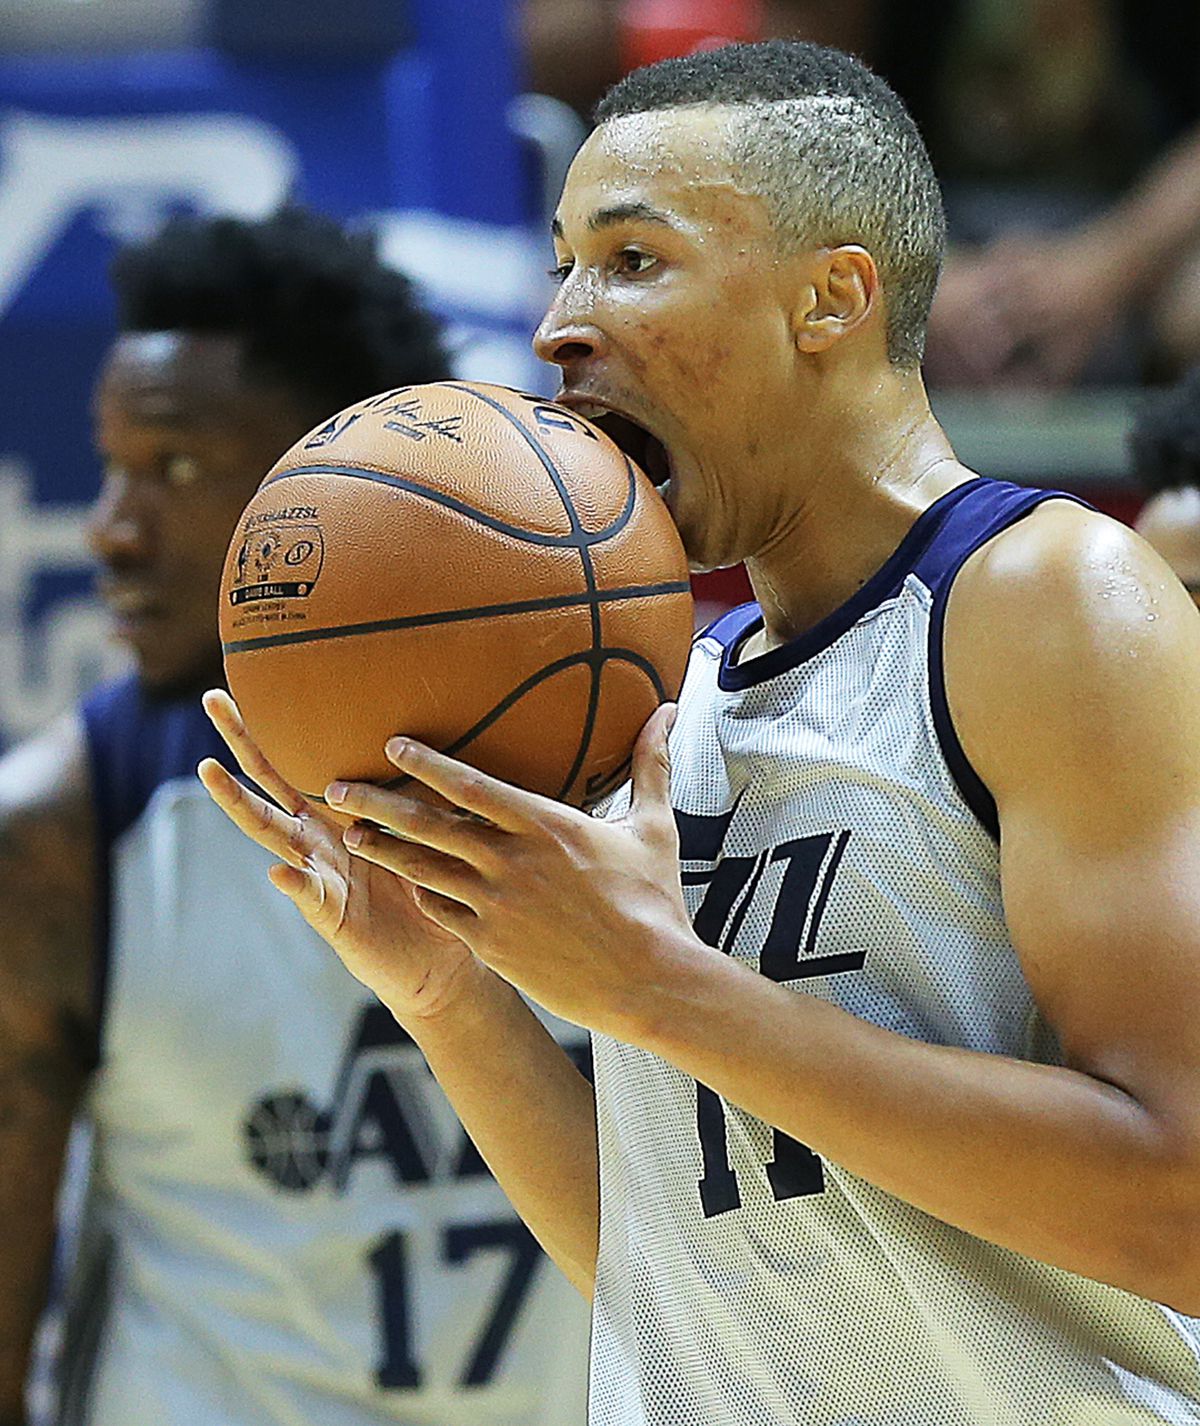 Utah Jazz guard Dante Exum (11) looks to eat the ball after a play as the Utah Jazz and the Philadelphia 76ers play in summer league action in the Huntsman Center at the University of Utah in Salt Lake City on Wednesday, July 5, 2017.